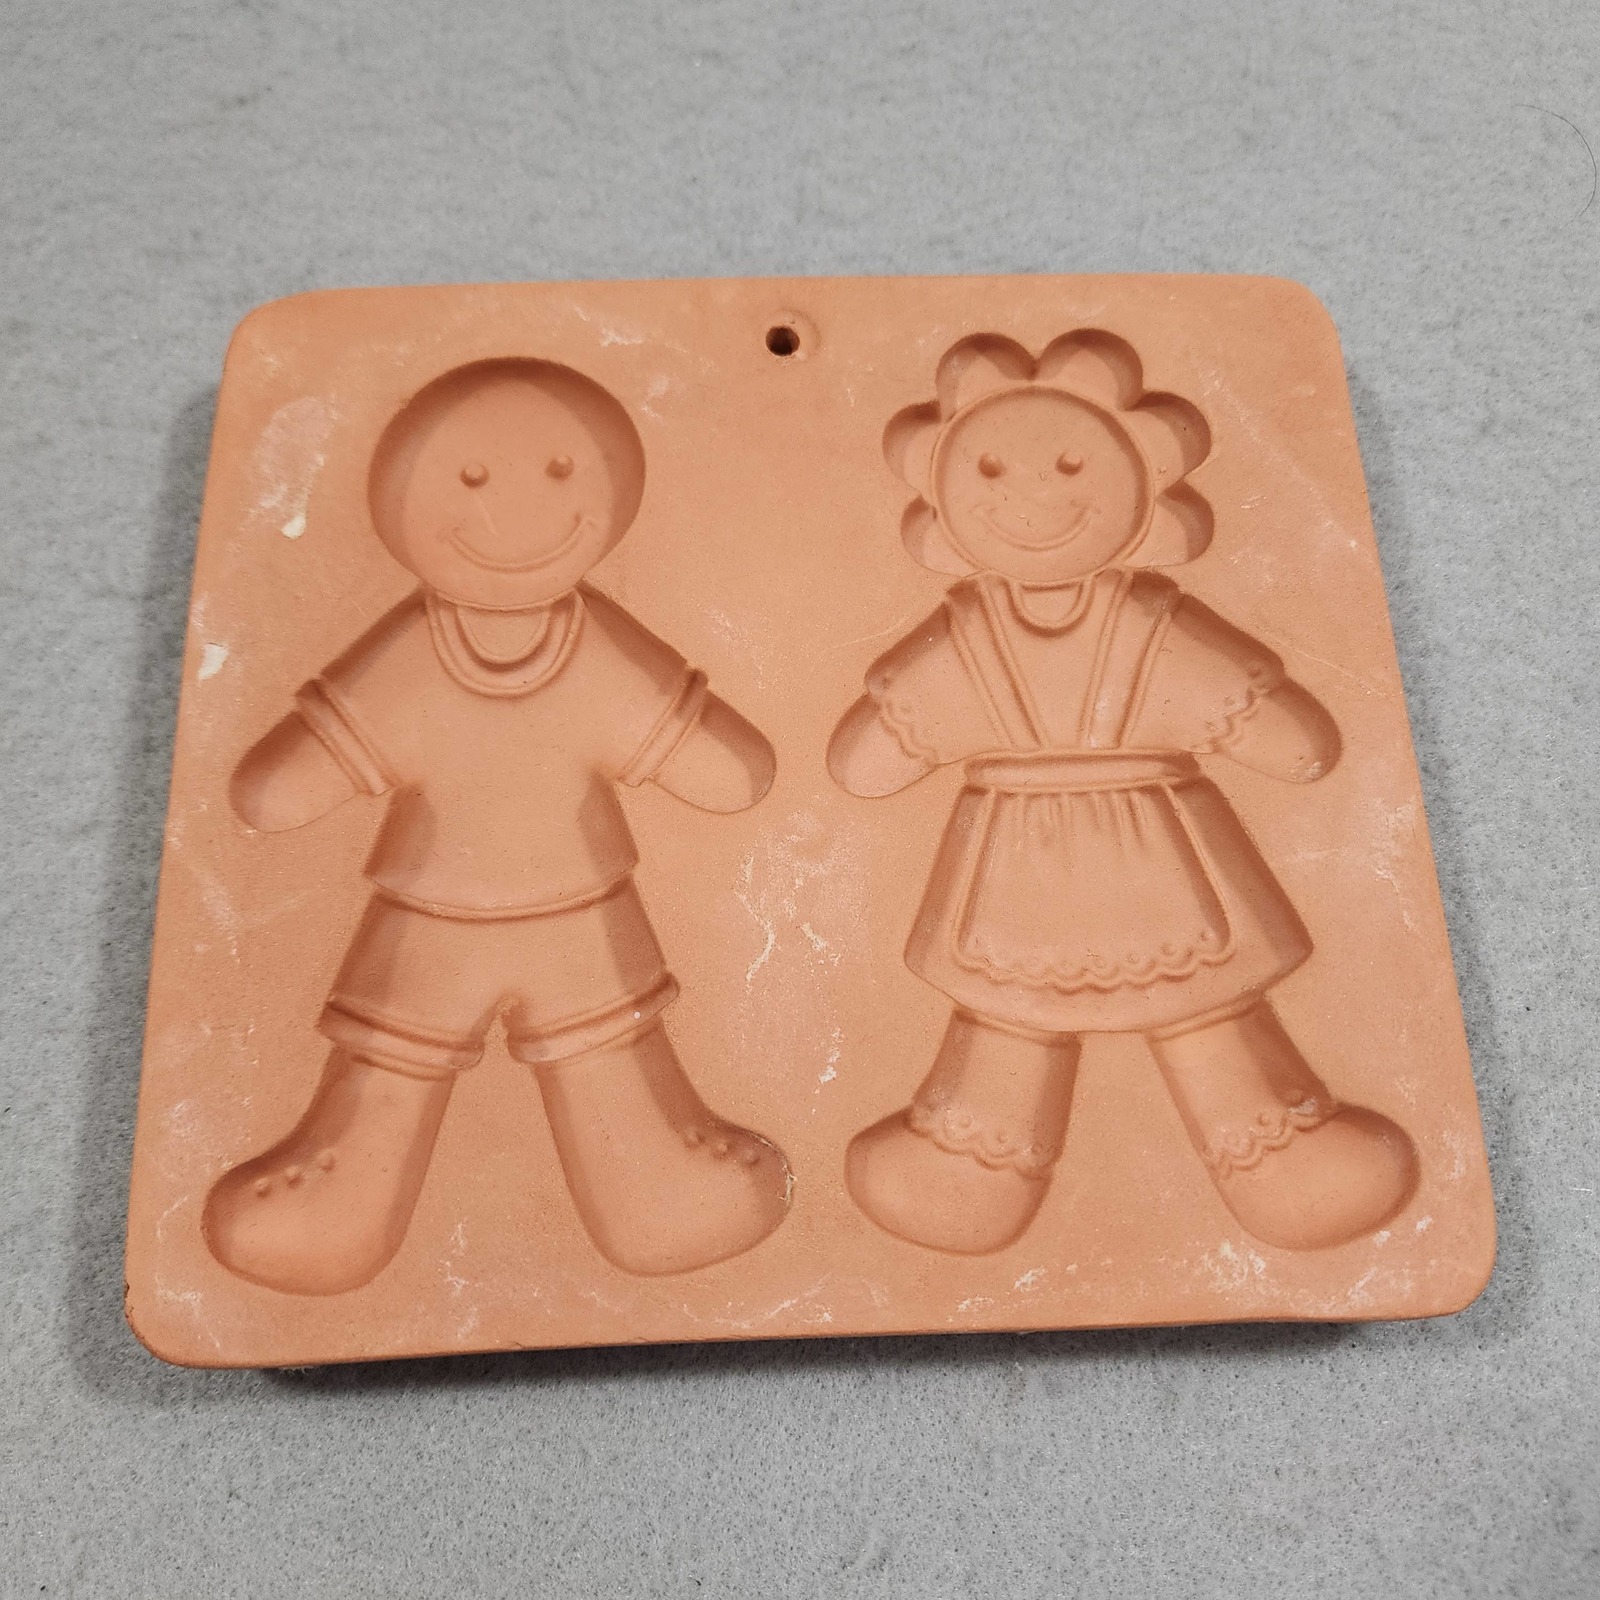 Cotton Press GINGERBREAD BOY & GIRL Cookie Mold Press Paper Casting 1995 Vintage - $10.38